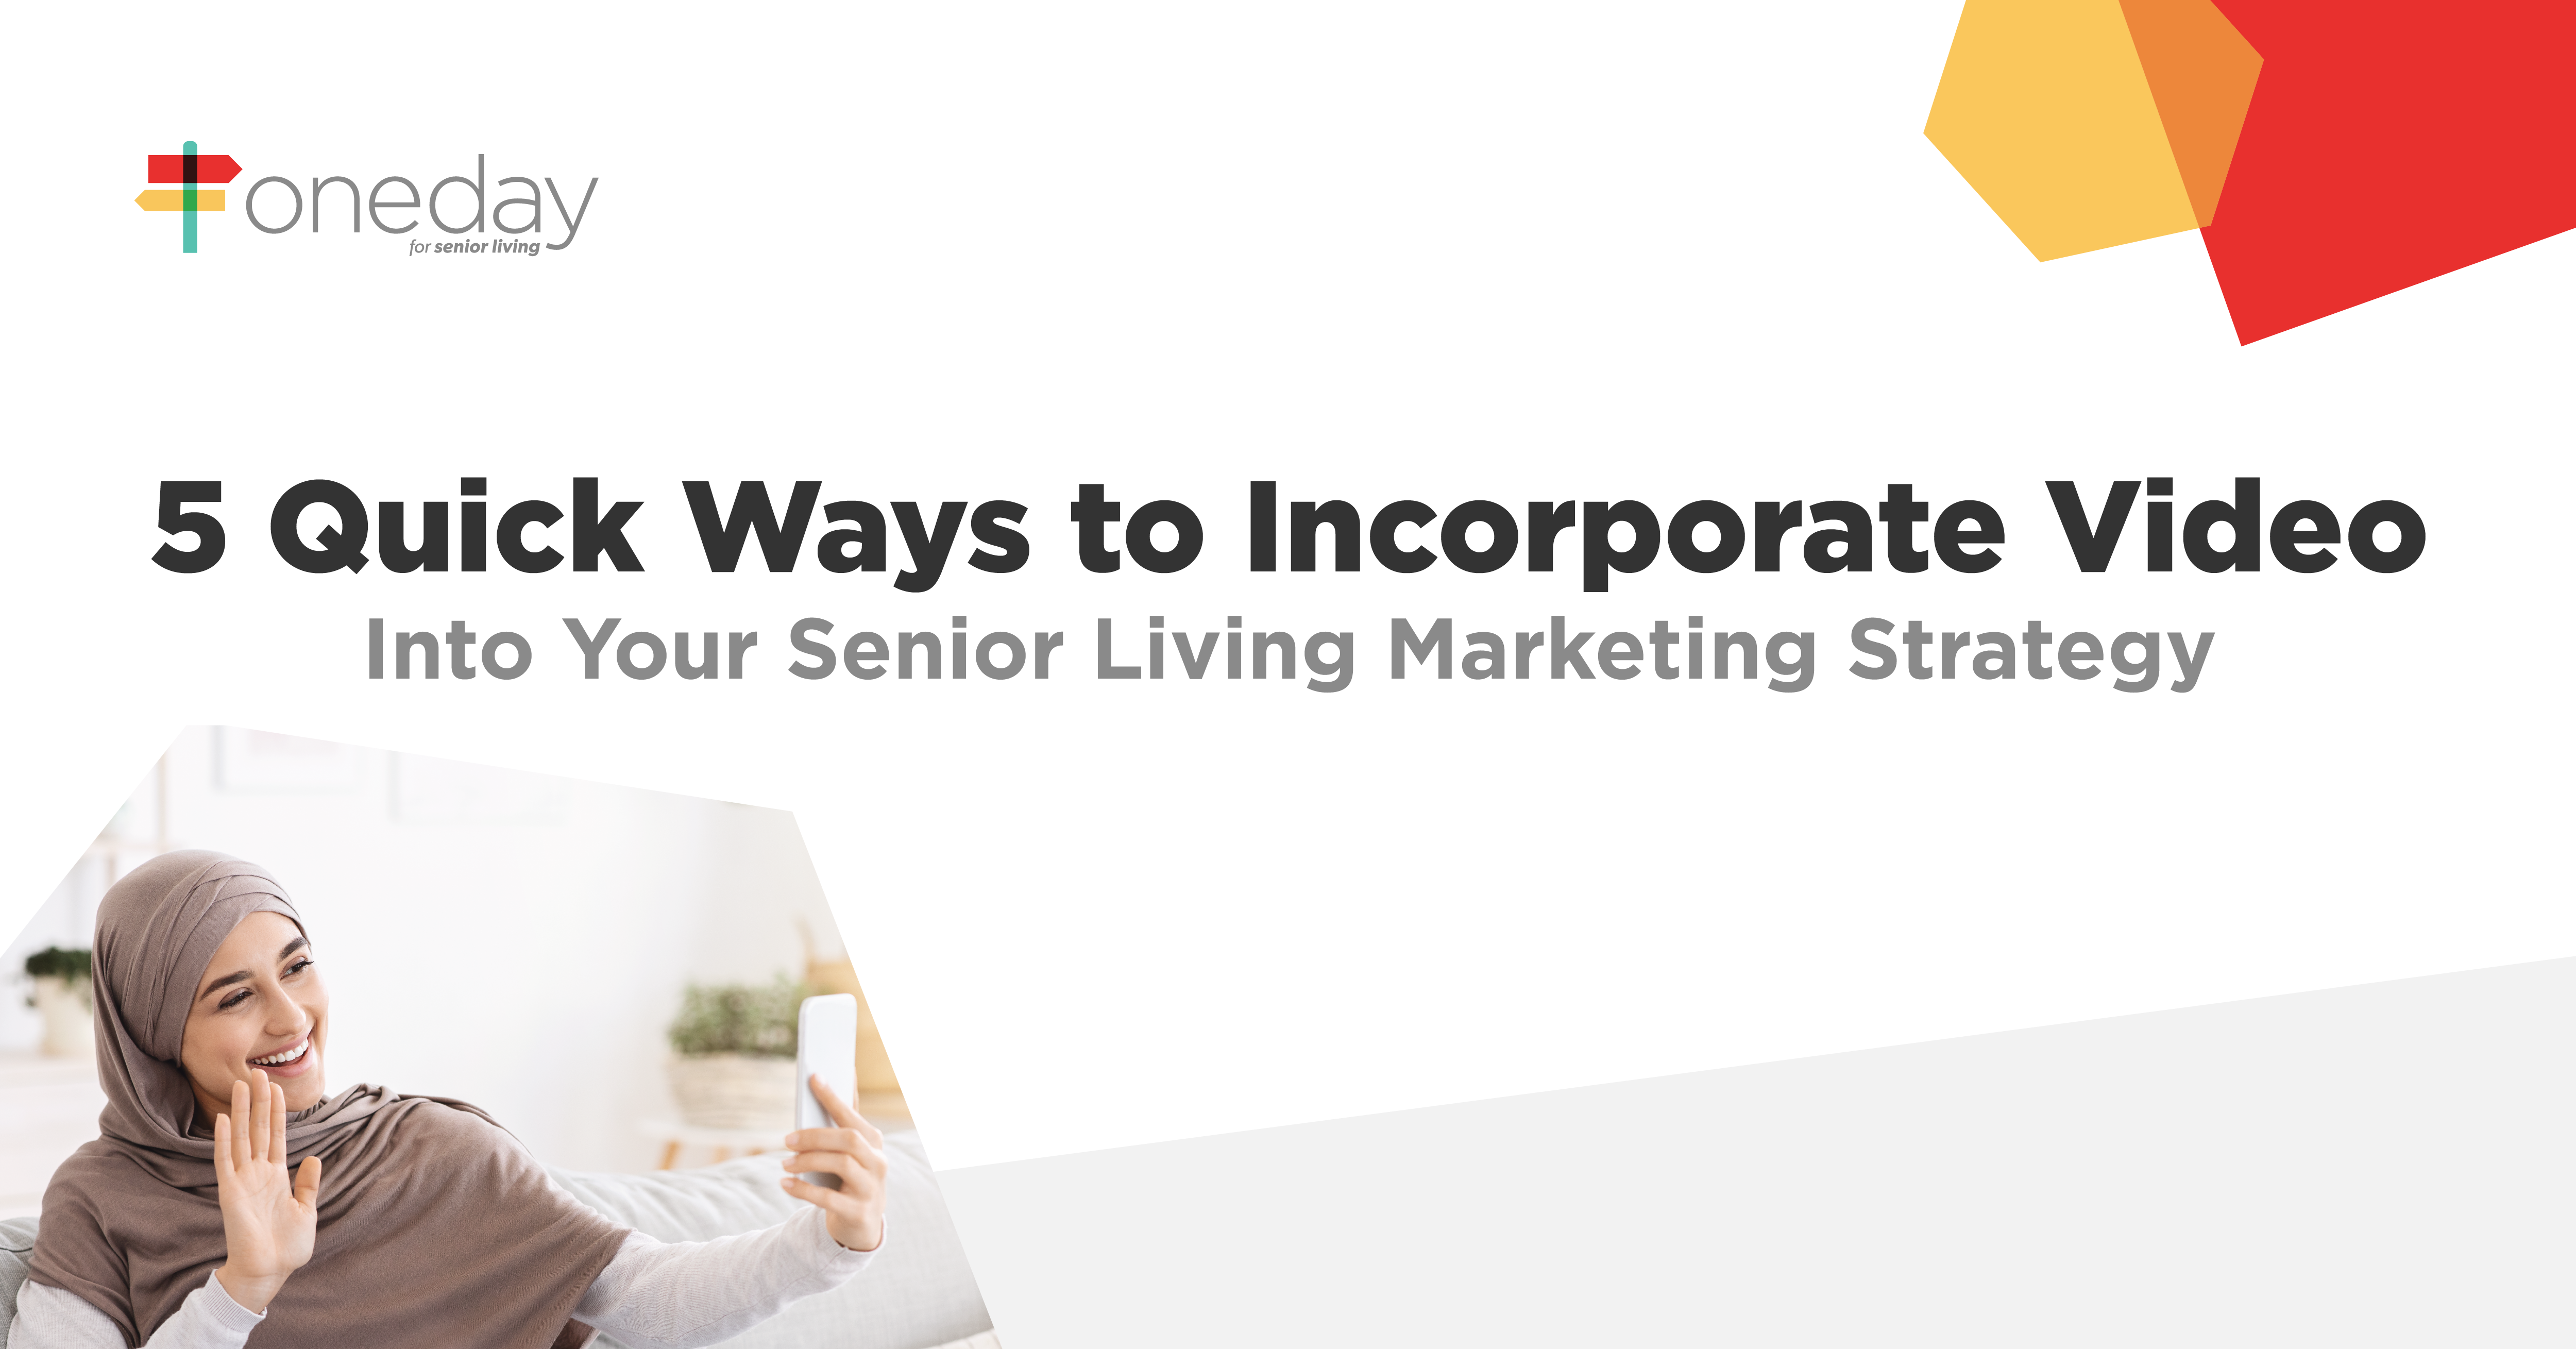 Simple but powerful ways your senior living community’s marketing team can integrate personalized videos into your marketing strategy to drive more move-ins.